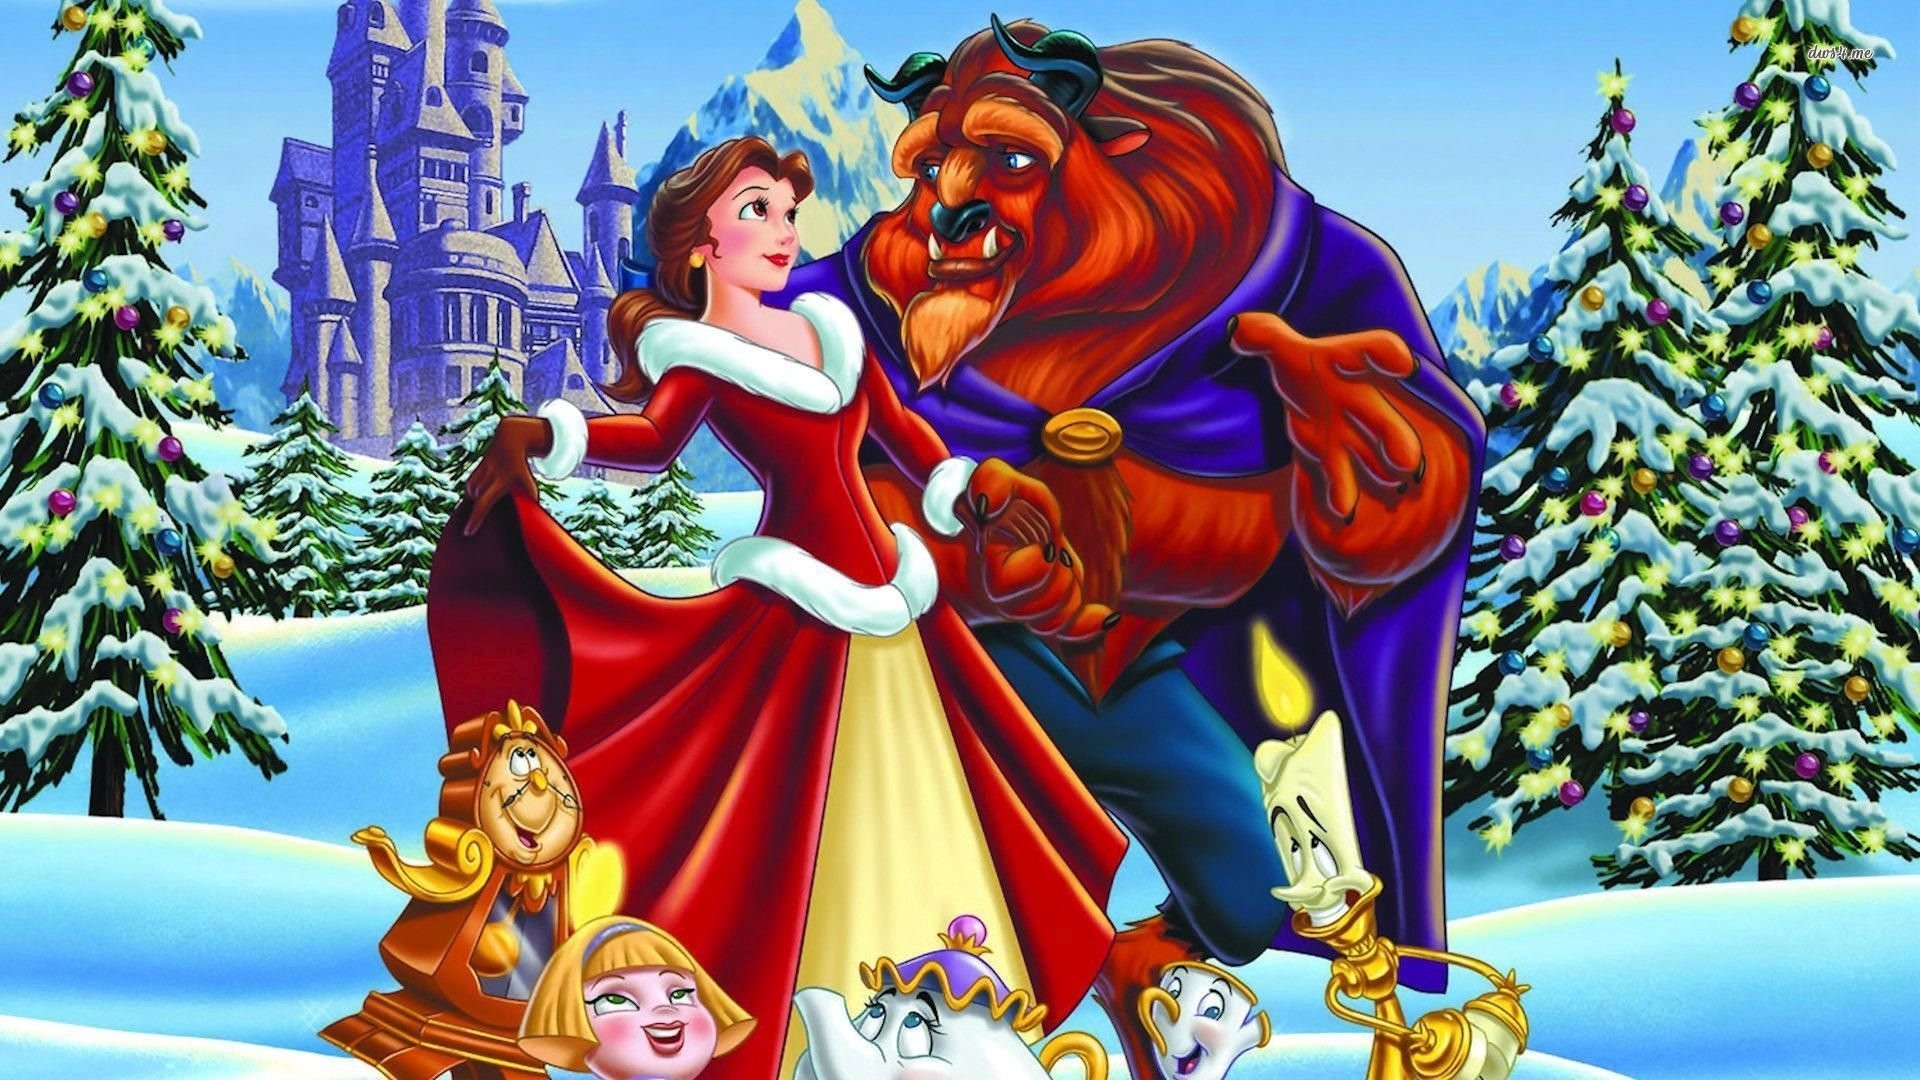 Beauty and the Beast Wallpaper (79+ images)